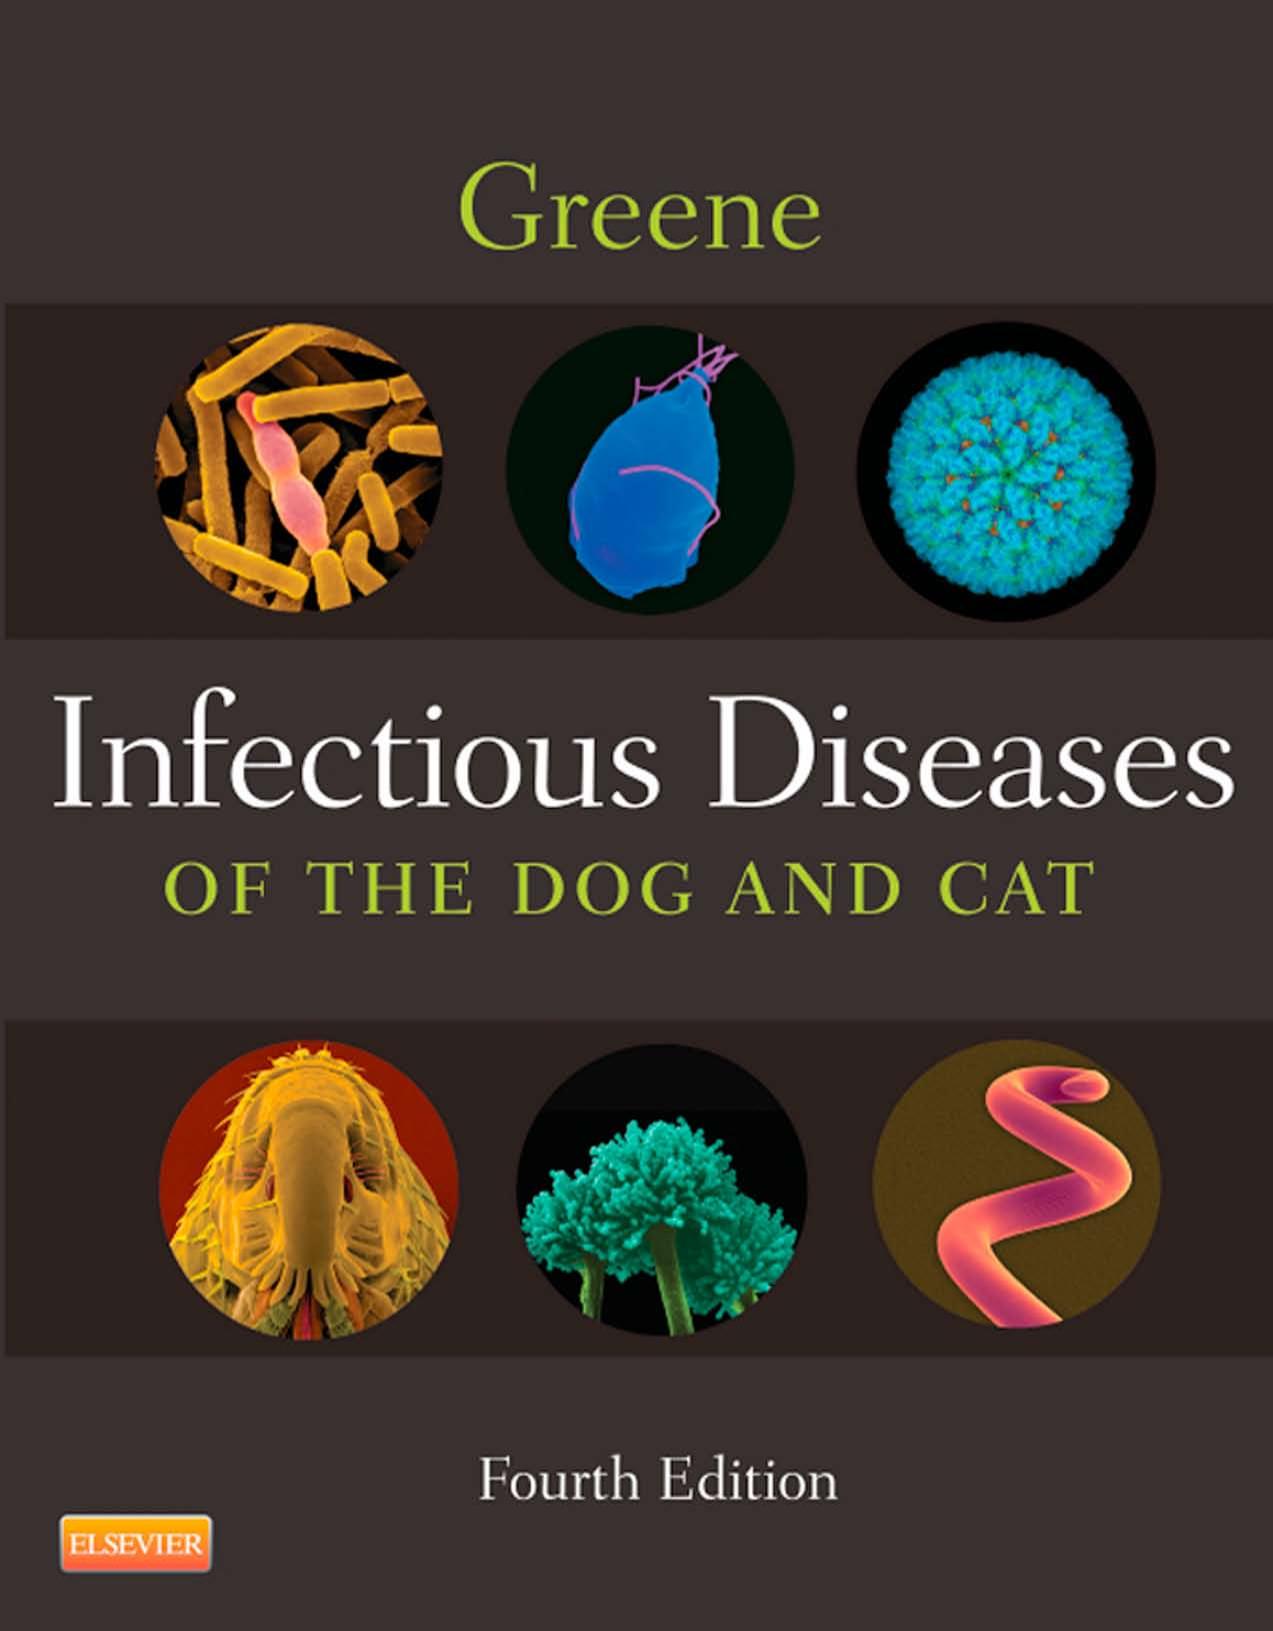 INFECTIOUS DISEASES OF THE DOG AND CAT